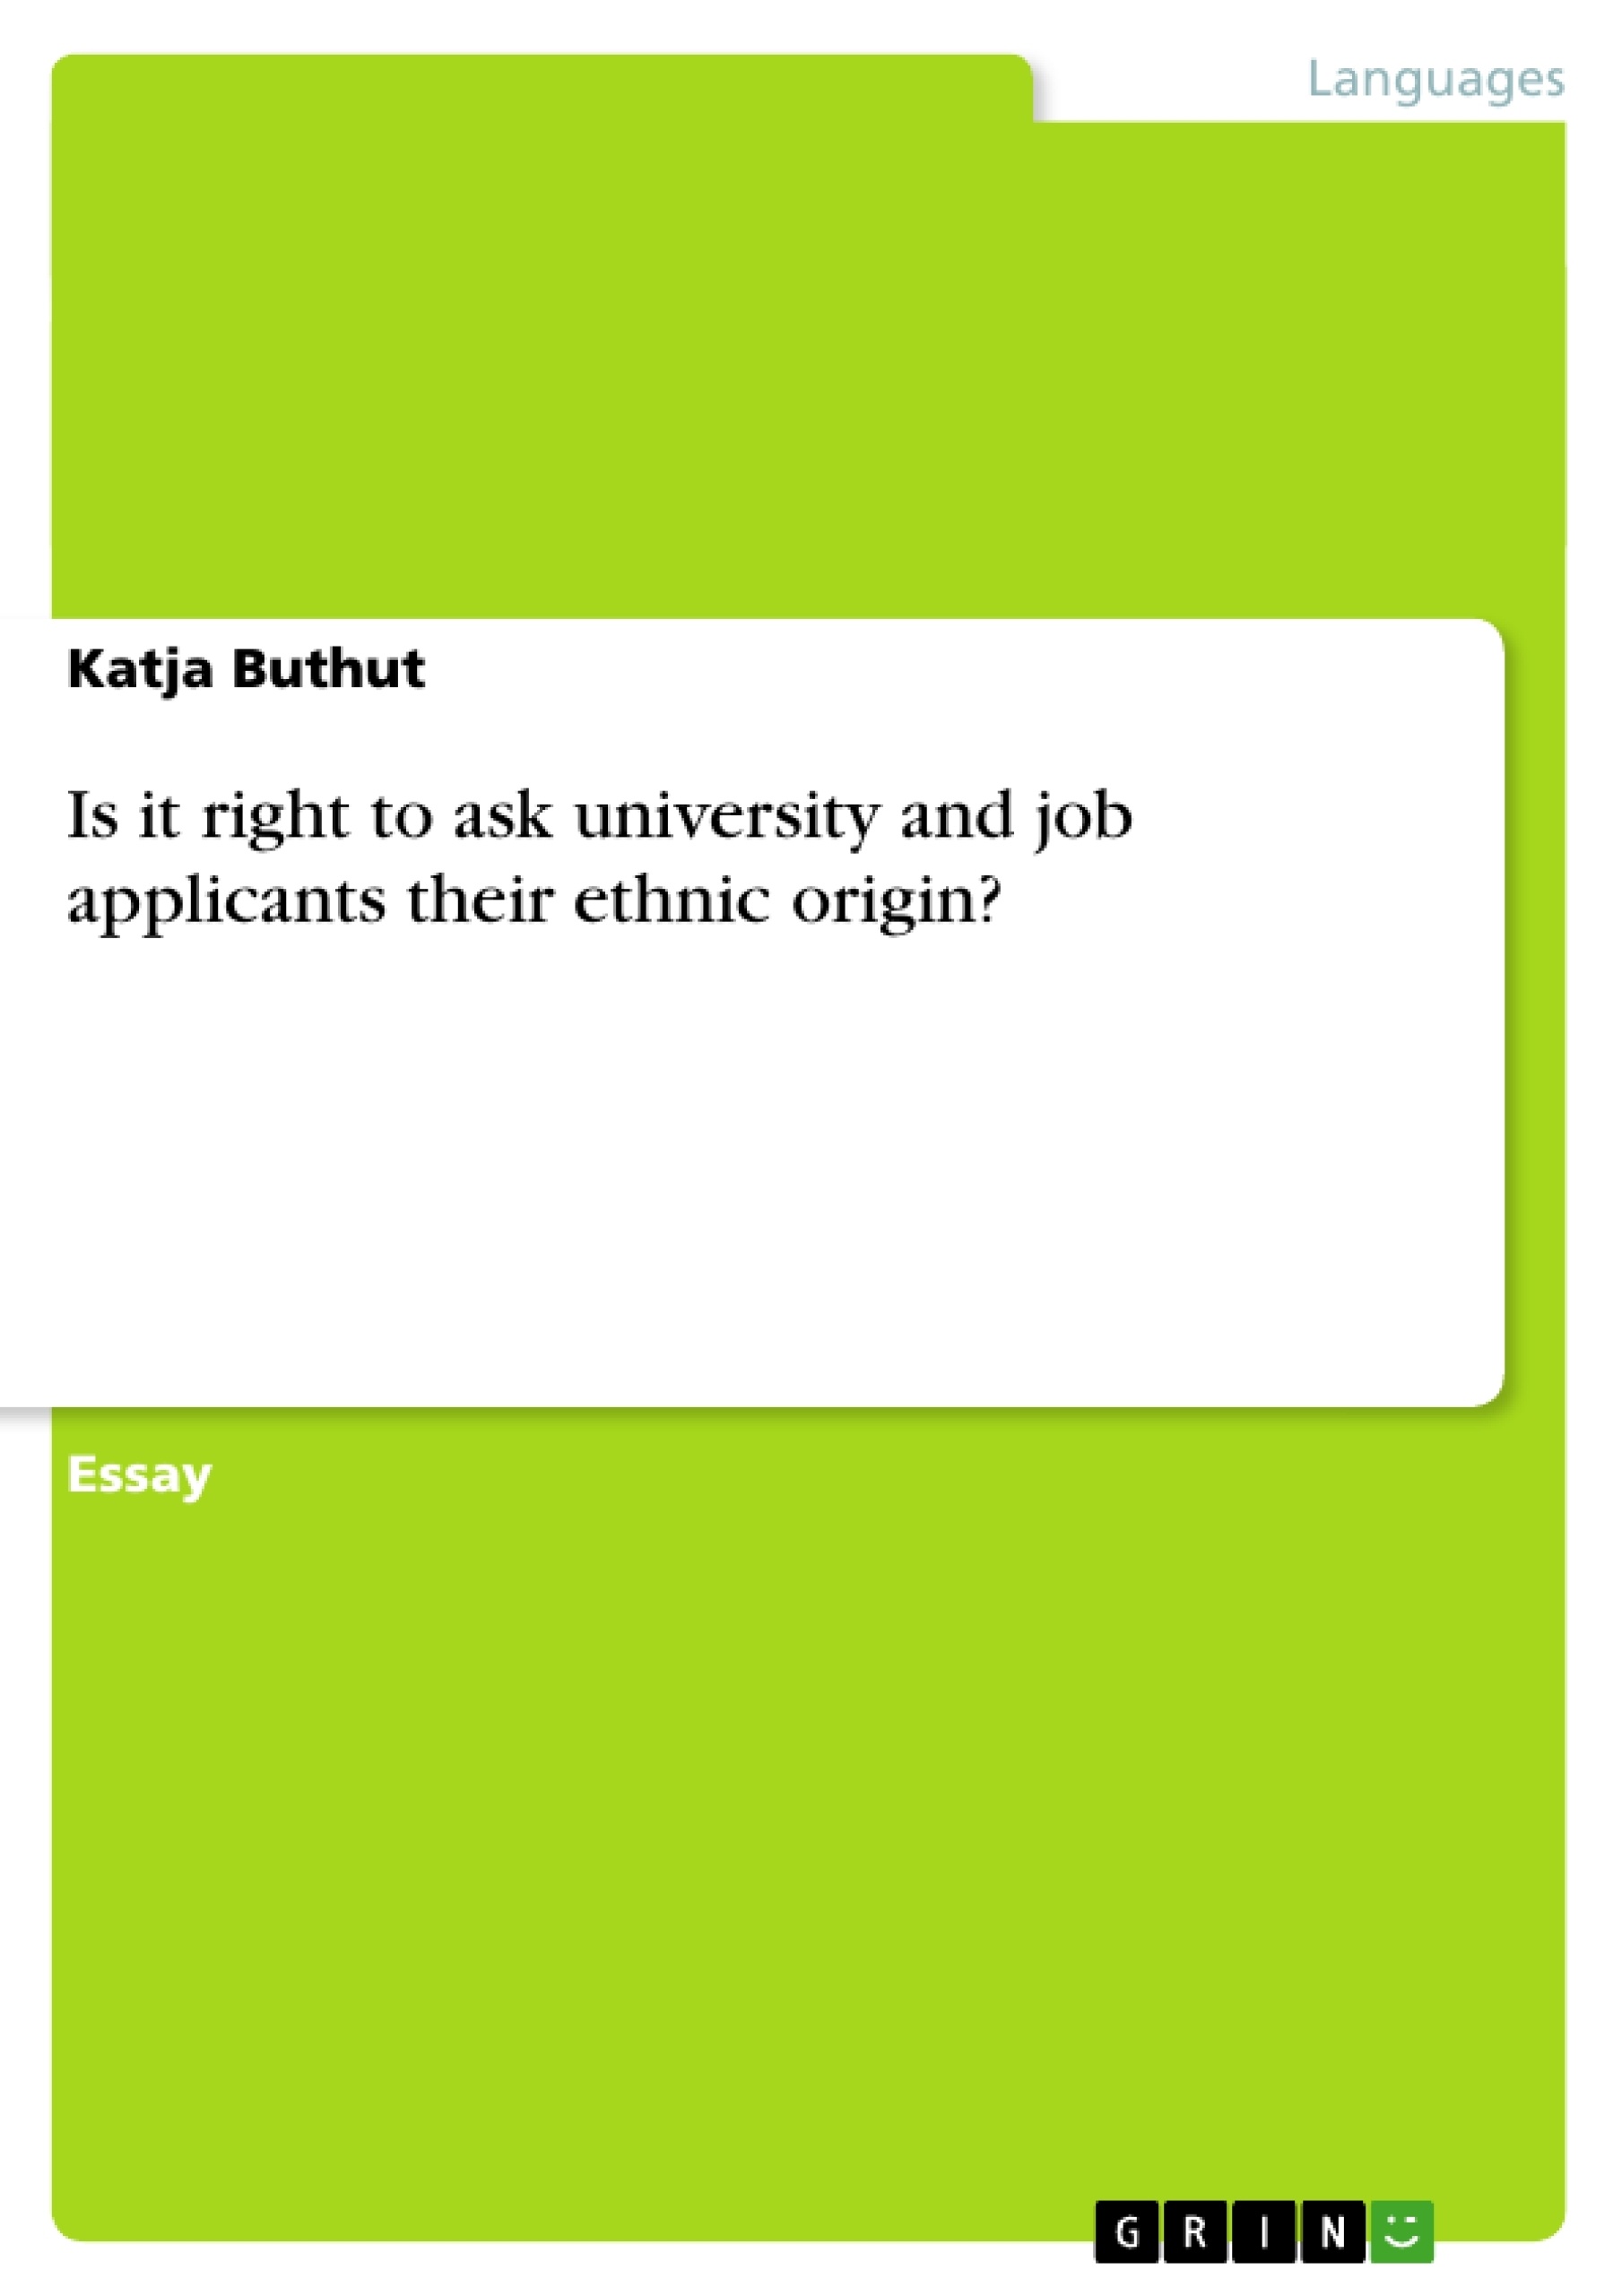 Title: Is it right to ask university and job applicants their ethnic origin?